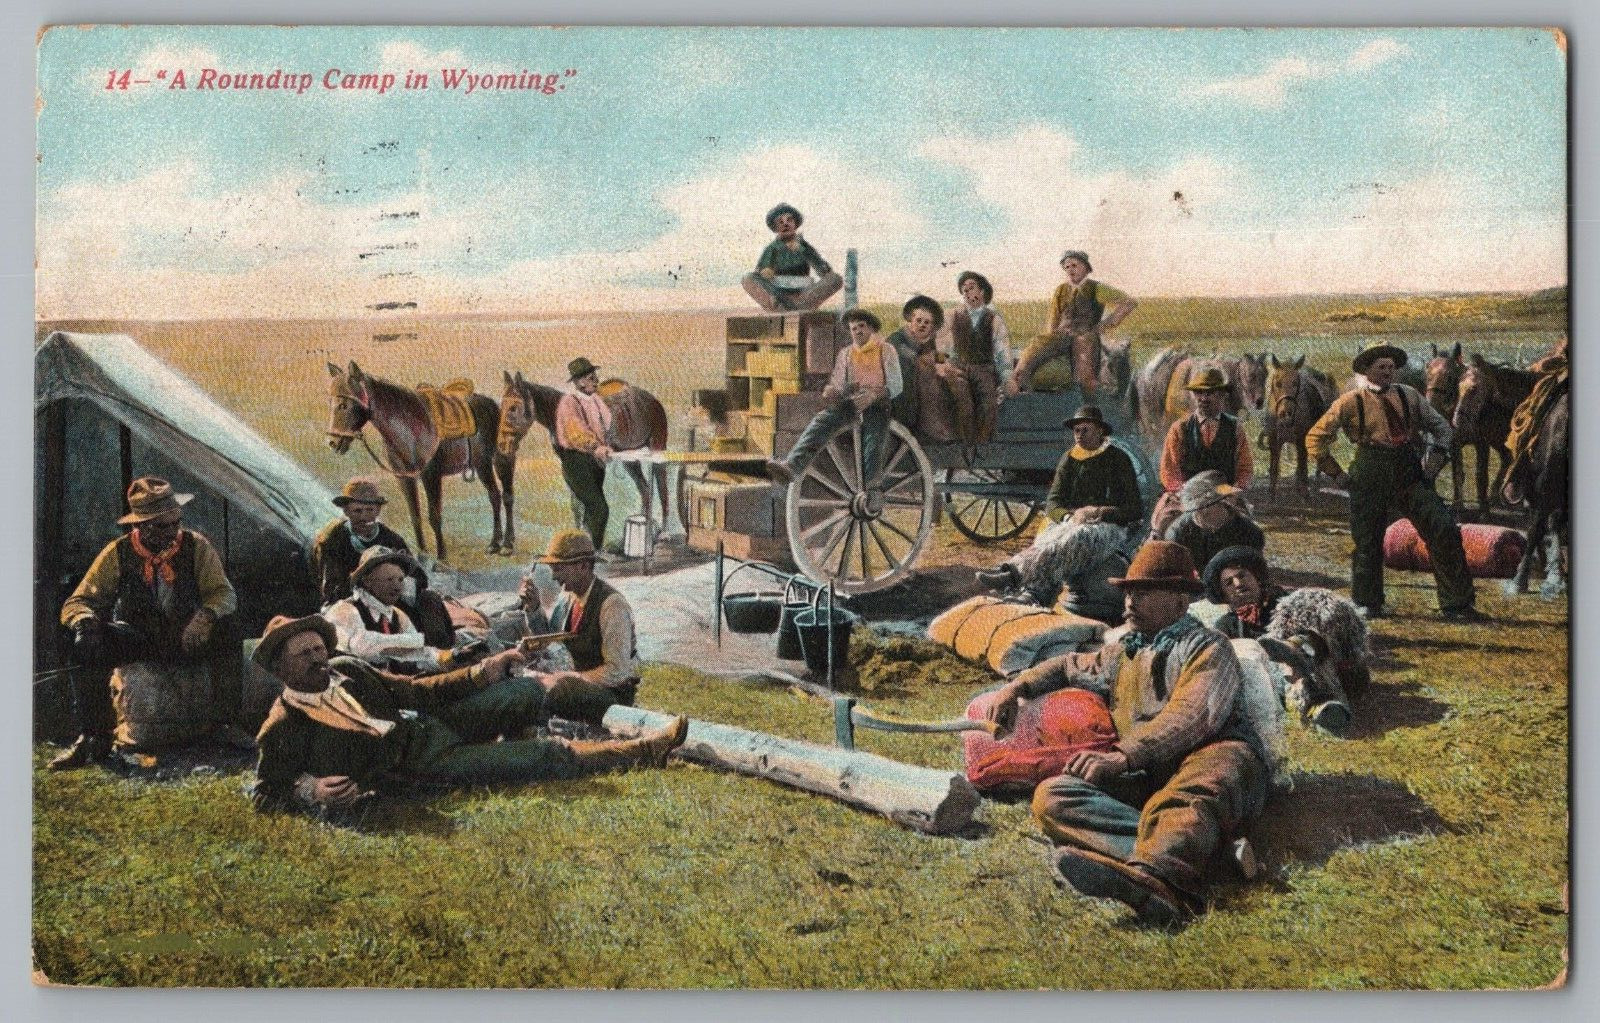 Postcard A Roundup Camp in Wyoming - Men Horses Wagon Camp c1909